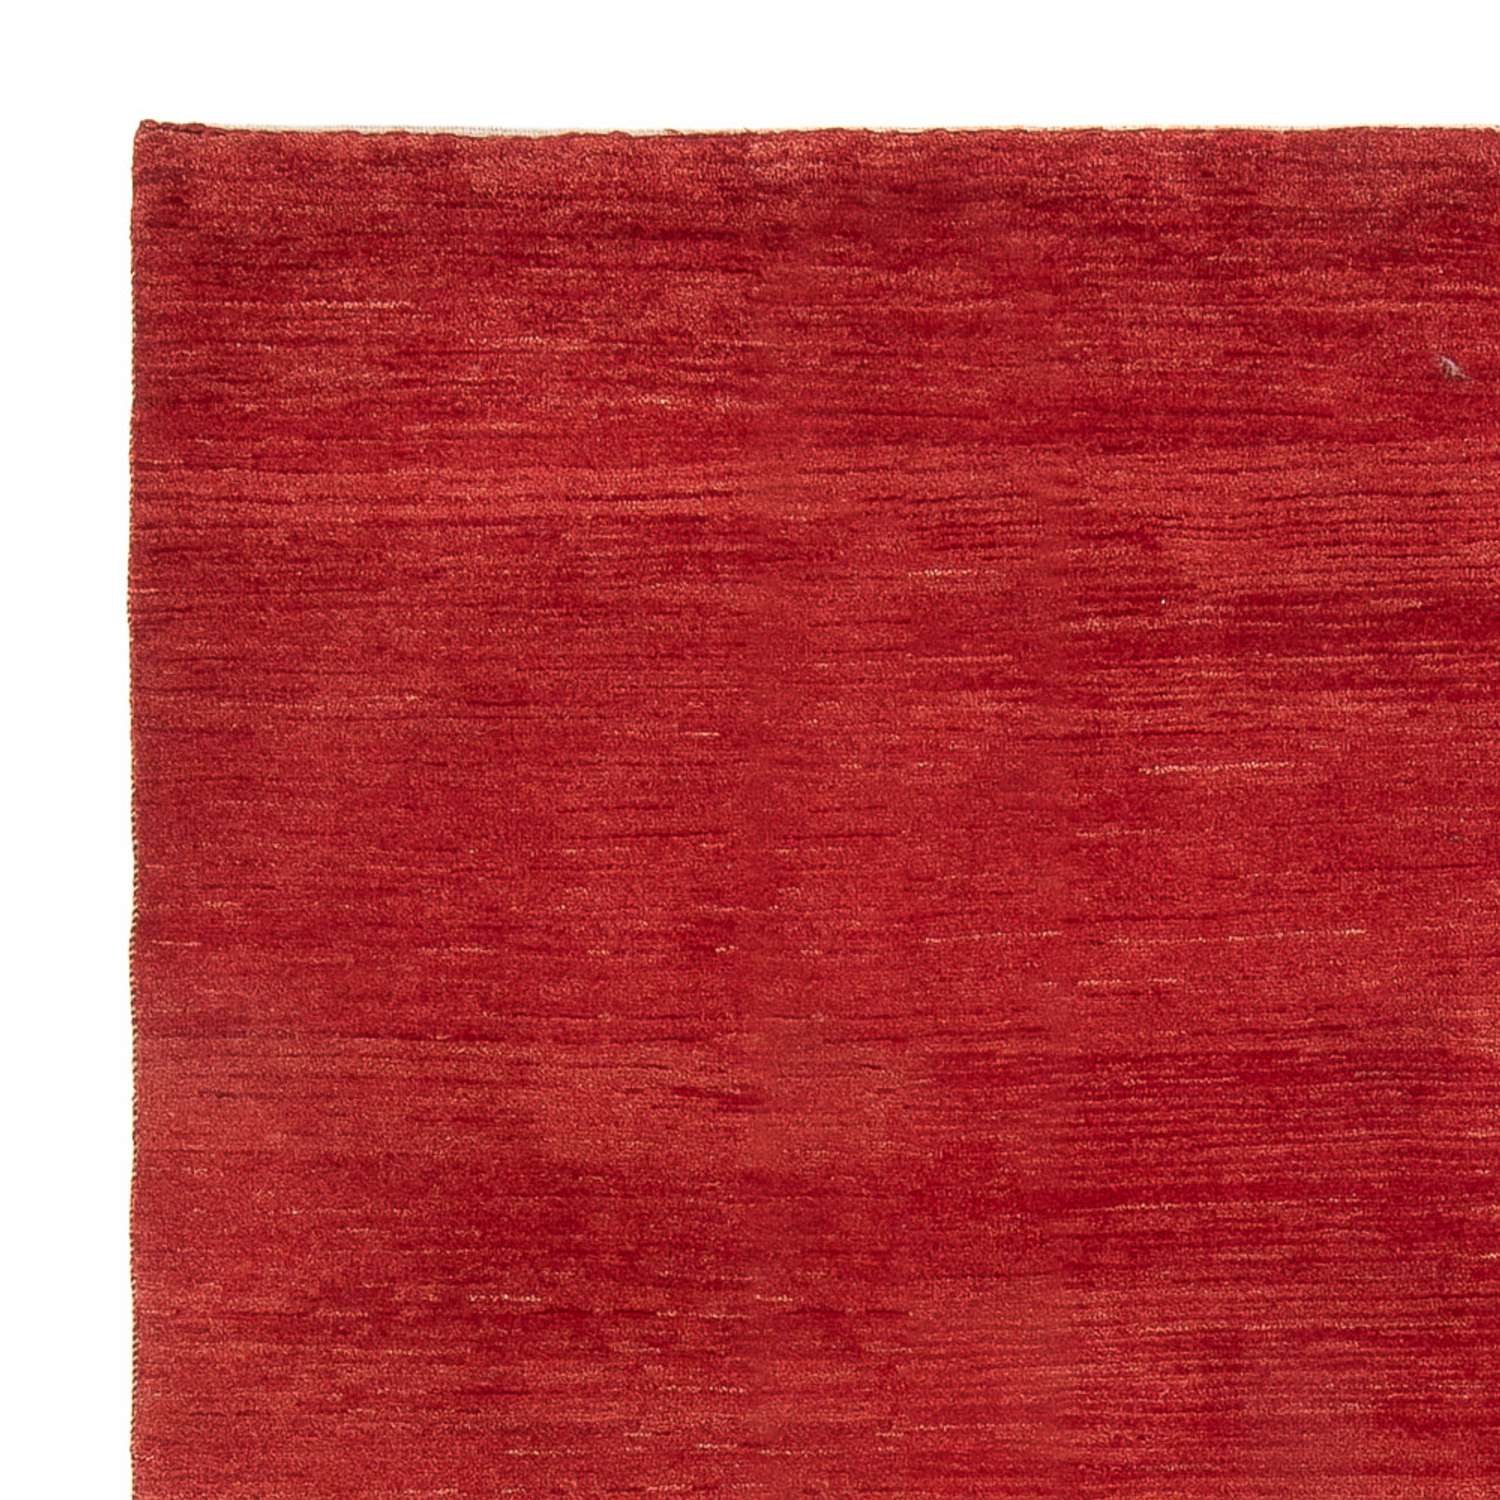 Gabbeh Rug - Perser square  - 210 x 210 cm - red